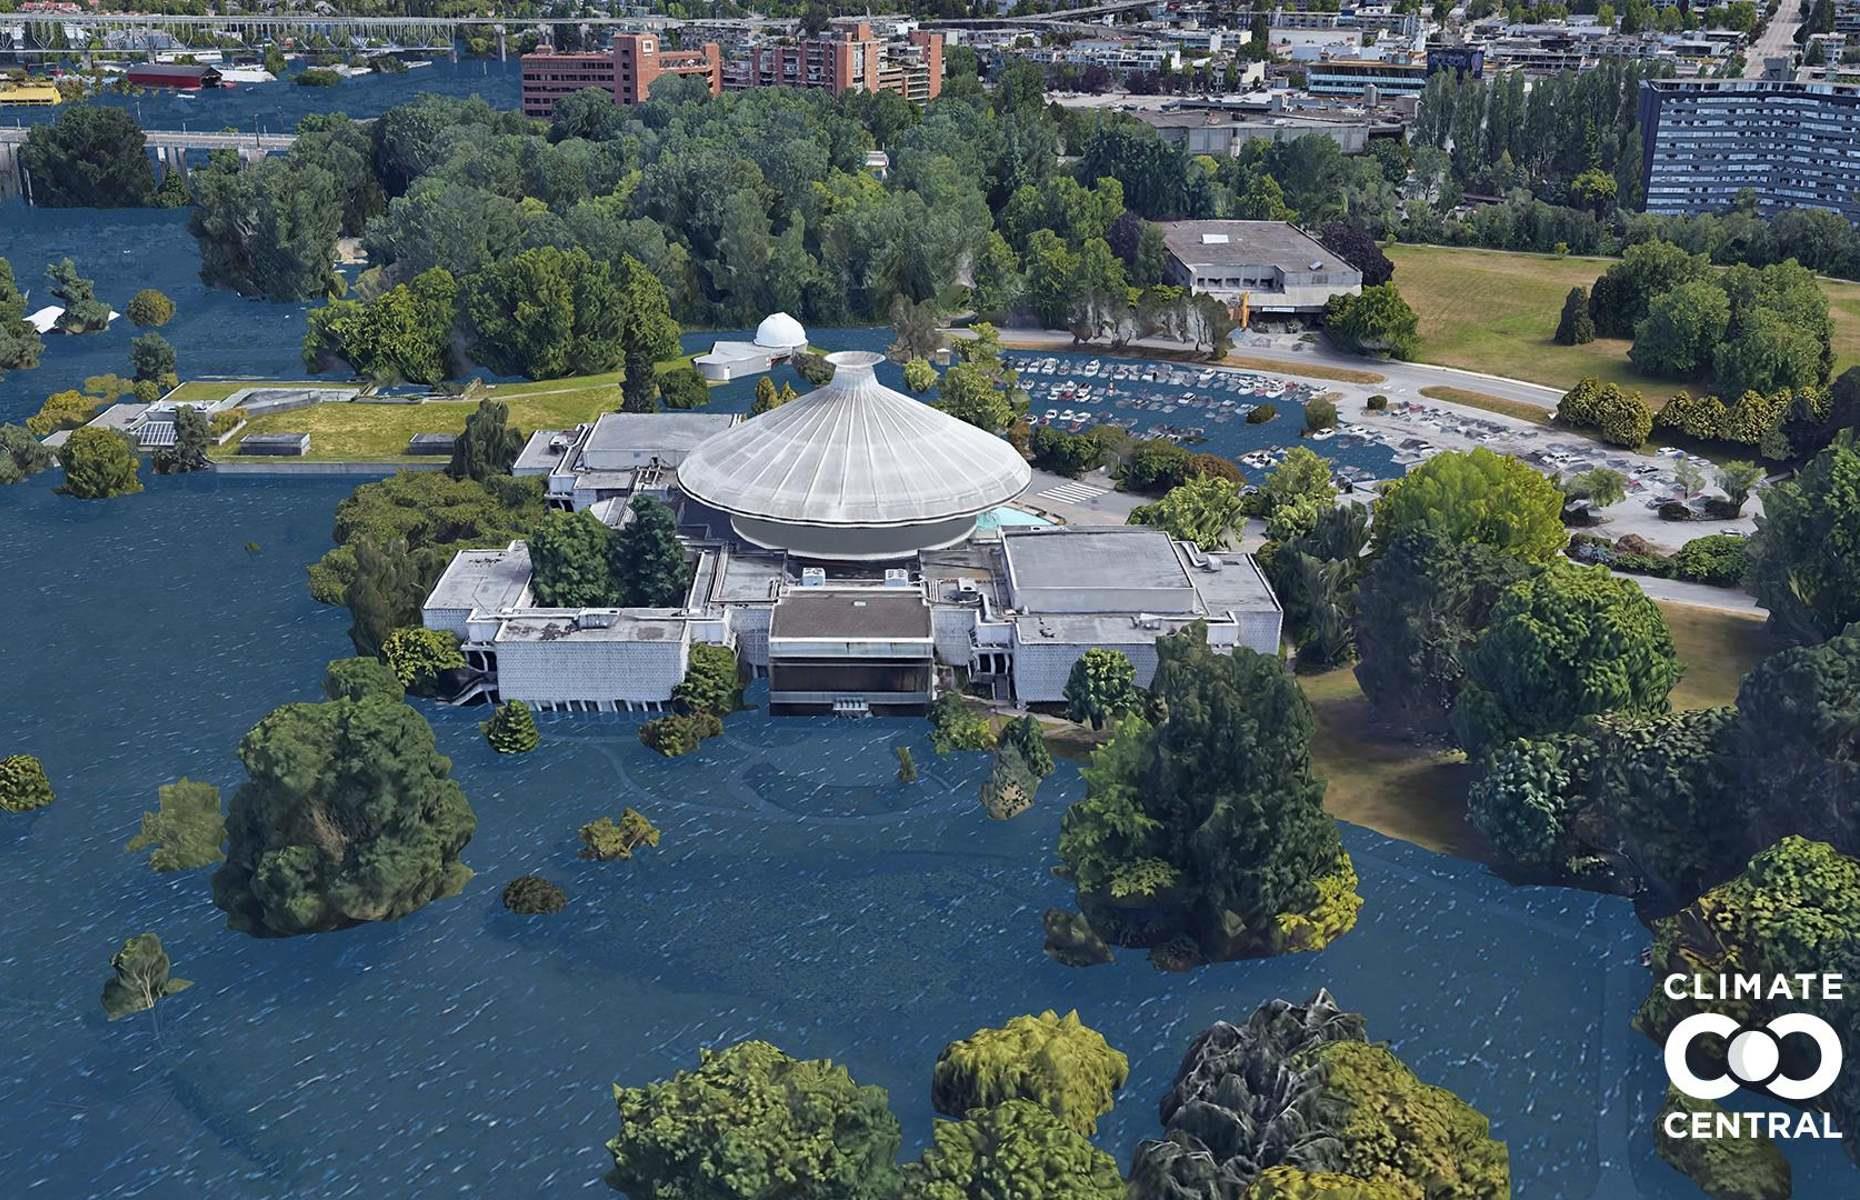 <p>Swathes of the coastal city of Vancouver will be plunged underwater due to global warming, with suburbs including Richmond, Ladner and Surrey set to be badly hit. The H. R. MacMillan Space Centre, pictured, will be all but lost as water sweeps in from English Bay in the west.</p>  <p><strong><a href="https://www.loveexploring.com/galleries/94665/these-images-show-the-true-impact-of-plastics-on-our-oceans">These shocking images show the true impact of plastic on our oceans</a></strong></p>